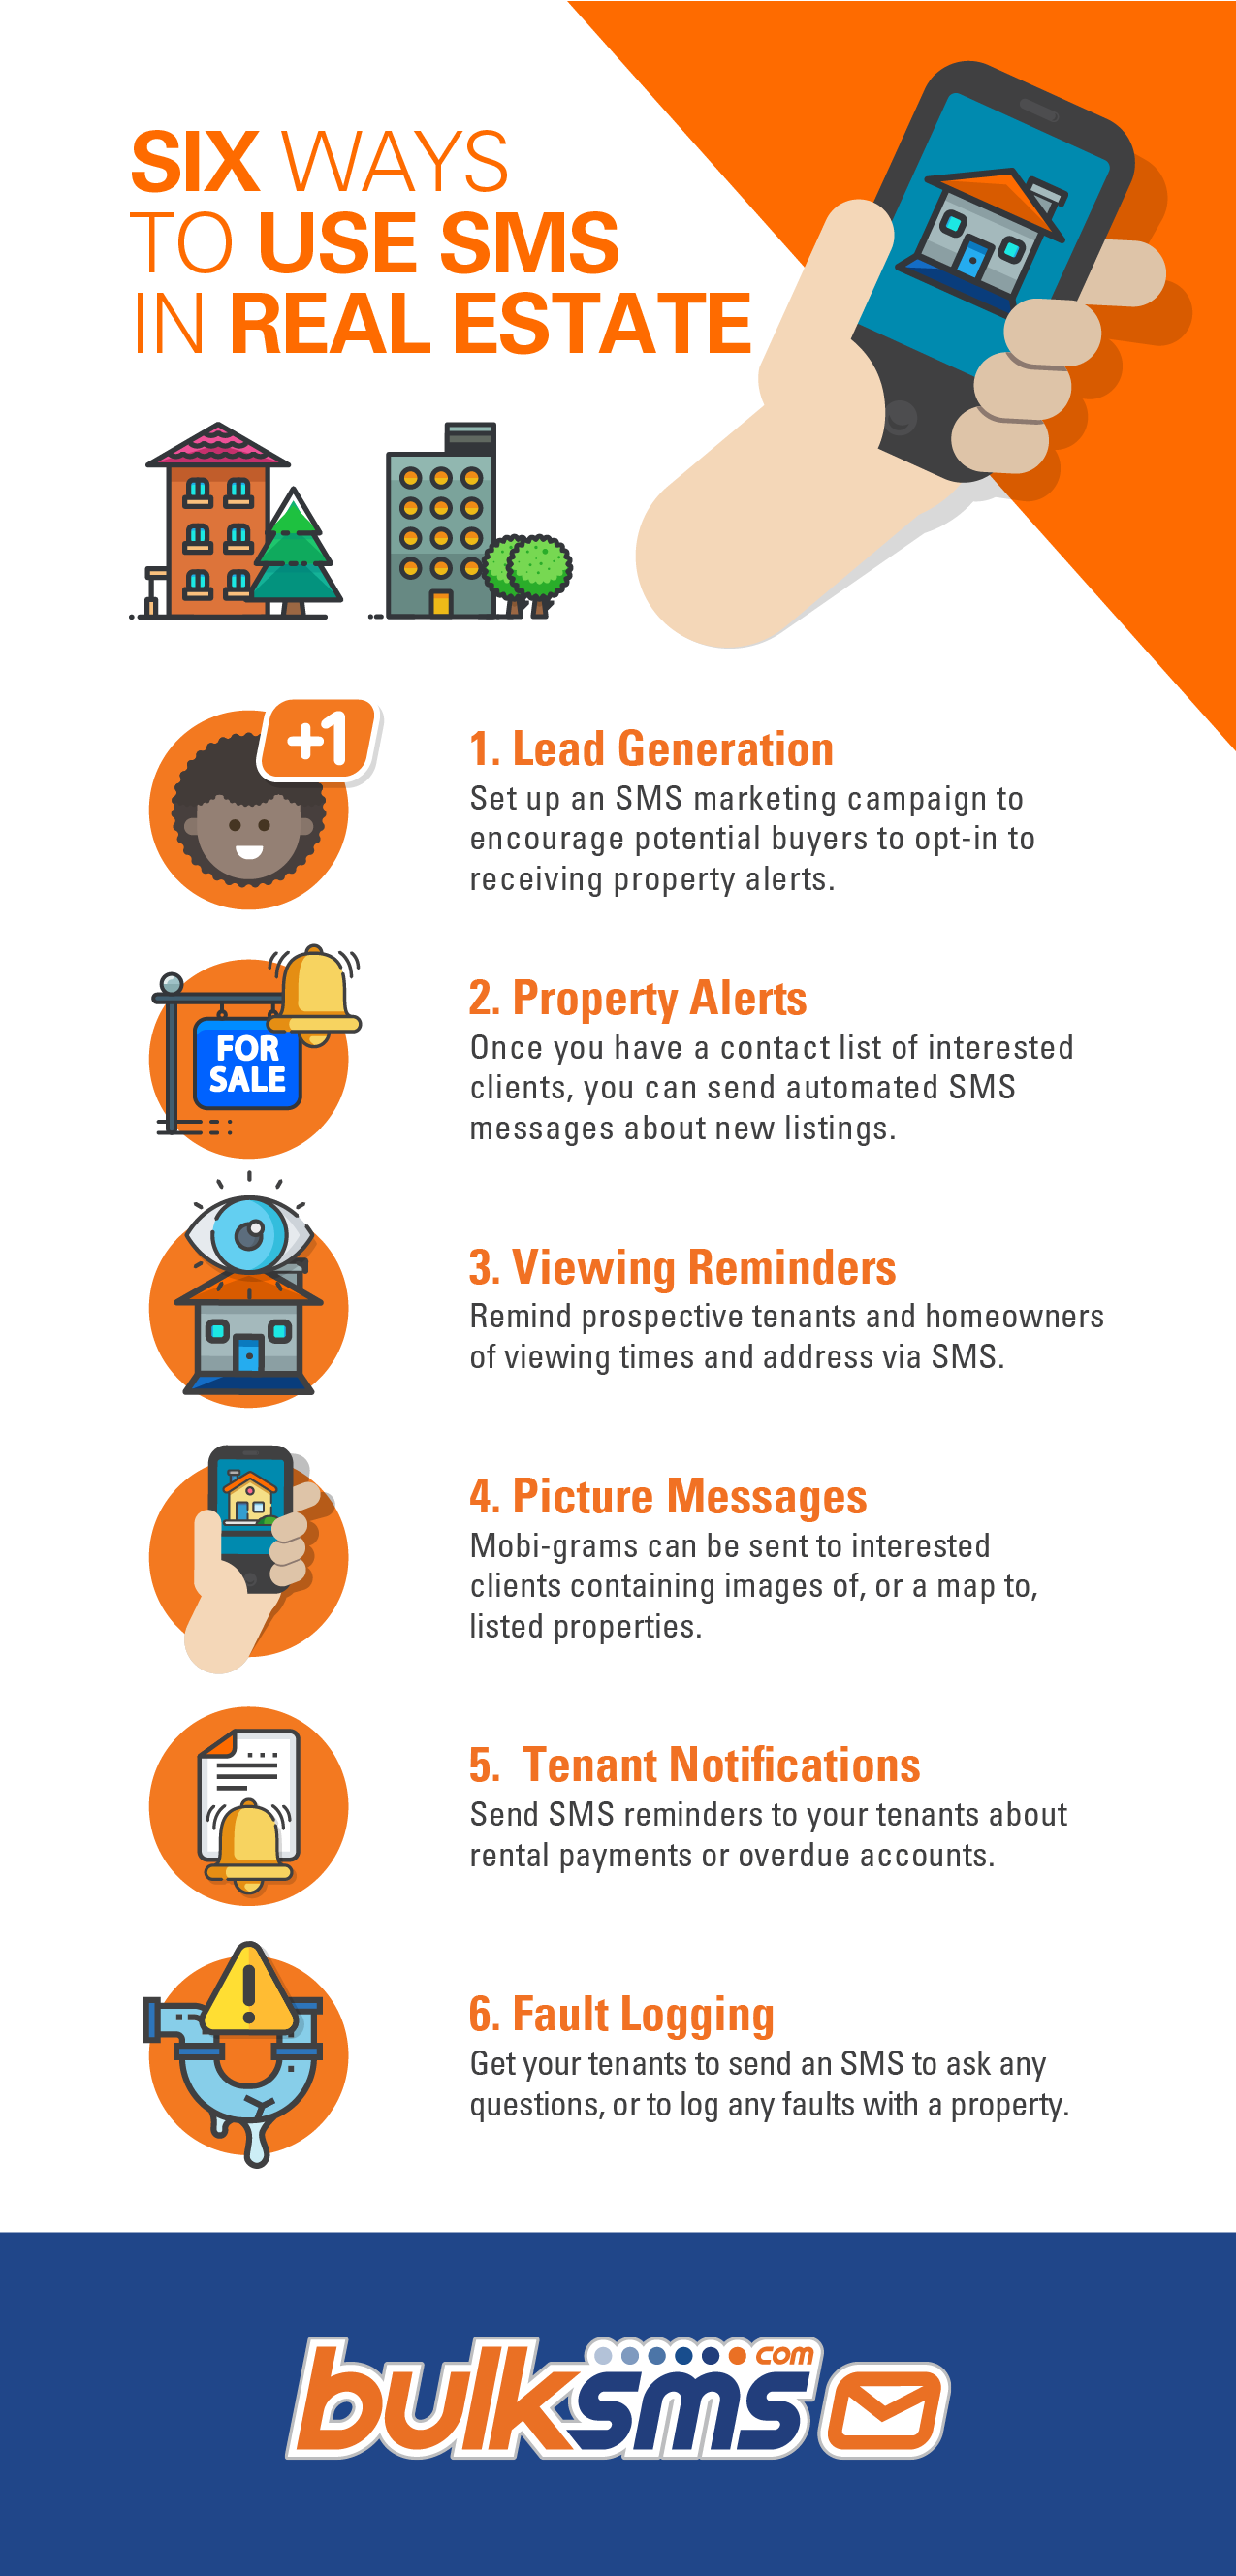 SMS for Real Estate - Realtor SMS Marketing Solutions - GuniSMS